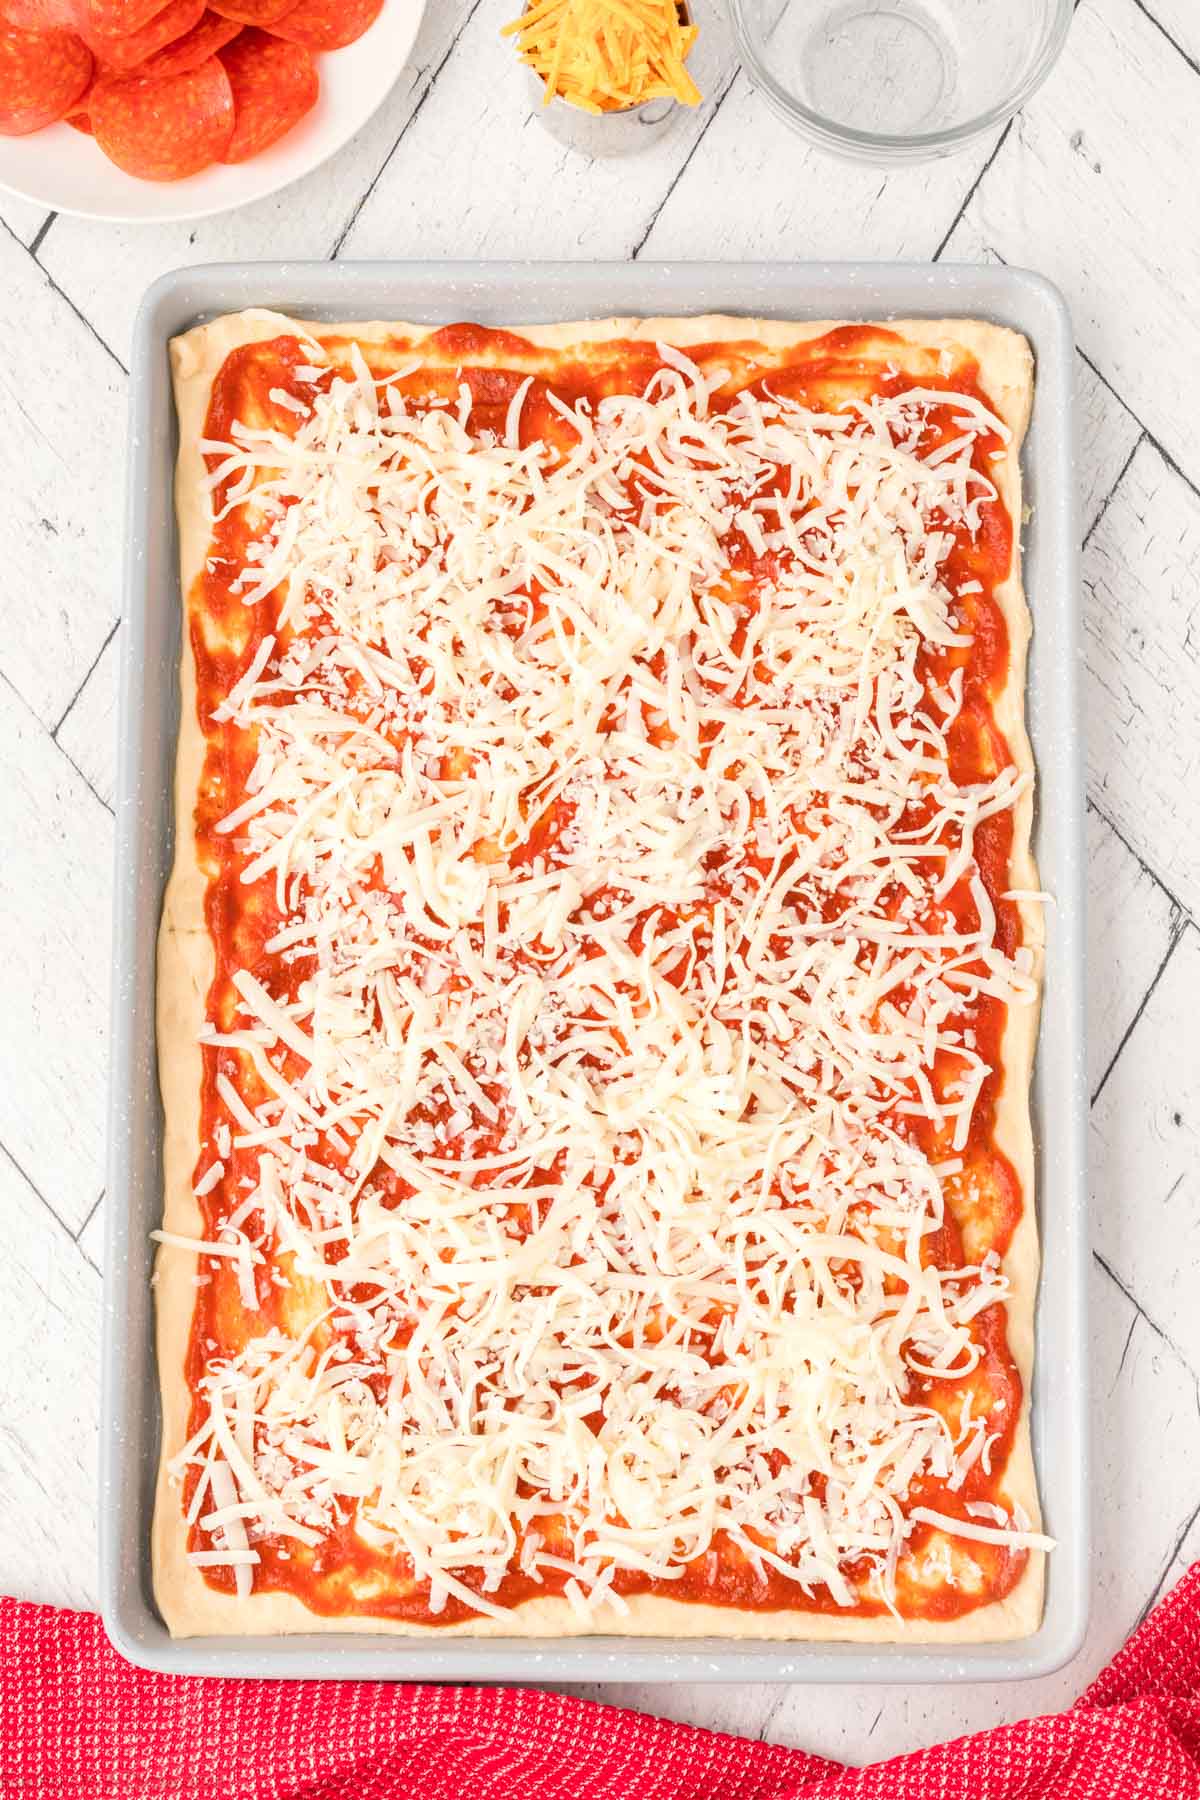 Topping shredded cheese over the pizza sauce